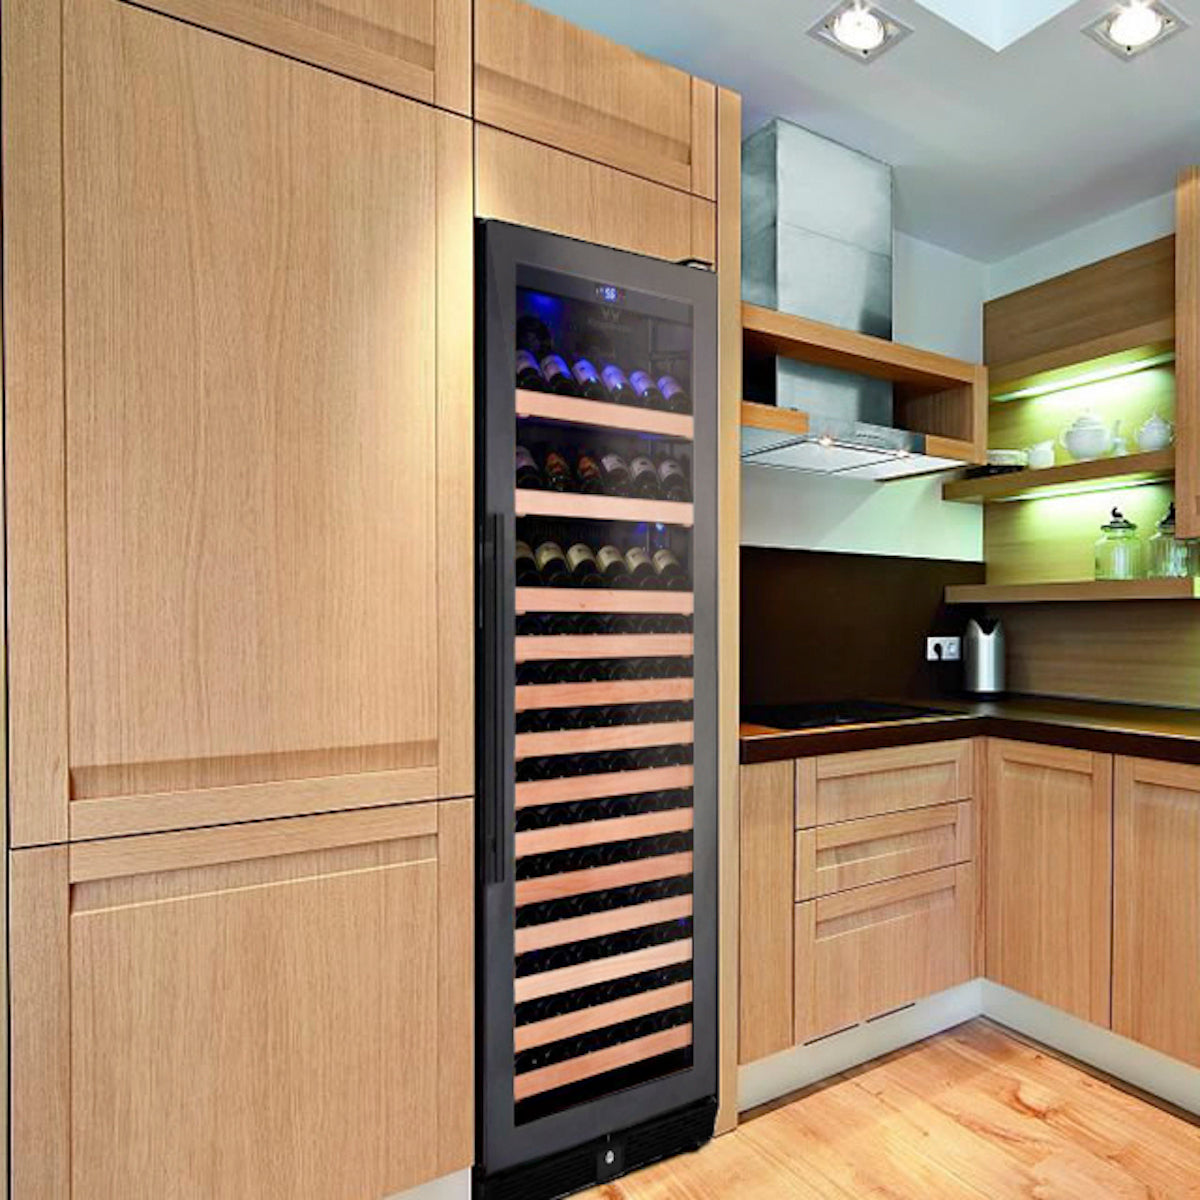 A sleek, single-zone wine fridge with stainless steel trim, holding up to 166 bottles. Perfect for any kitchen, bar, or wine room.